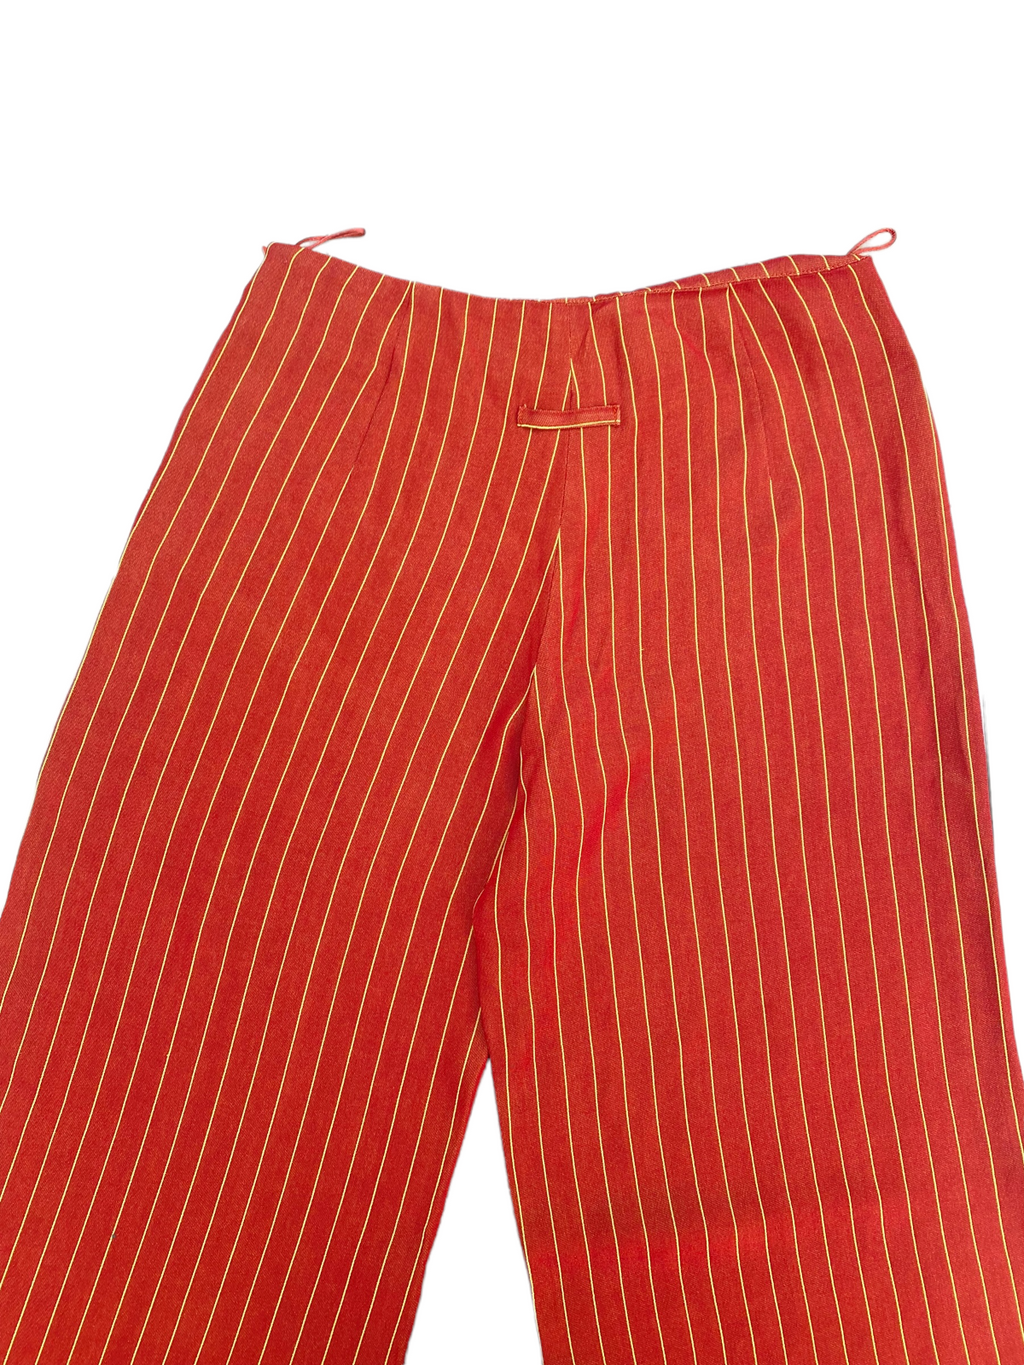 Vintage Striped Flare Red Pants